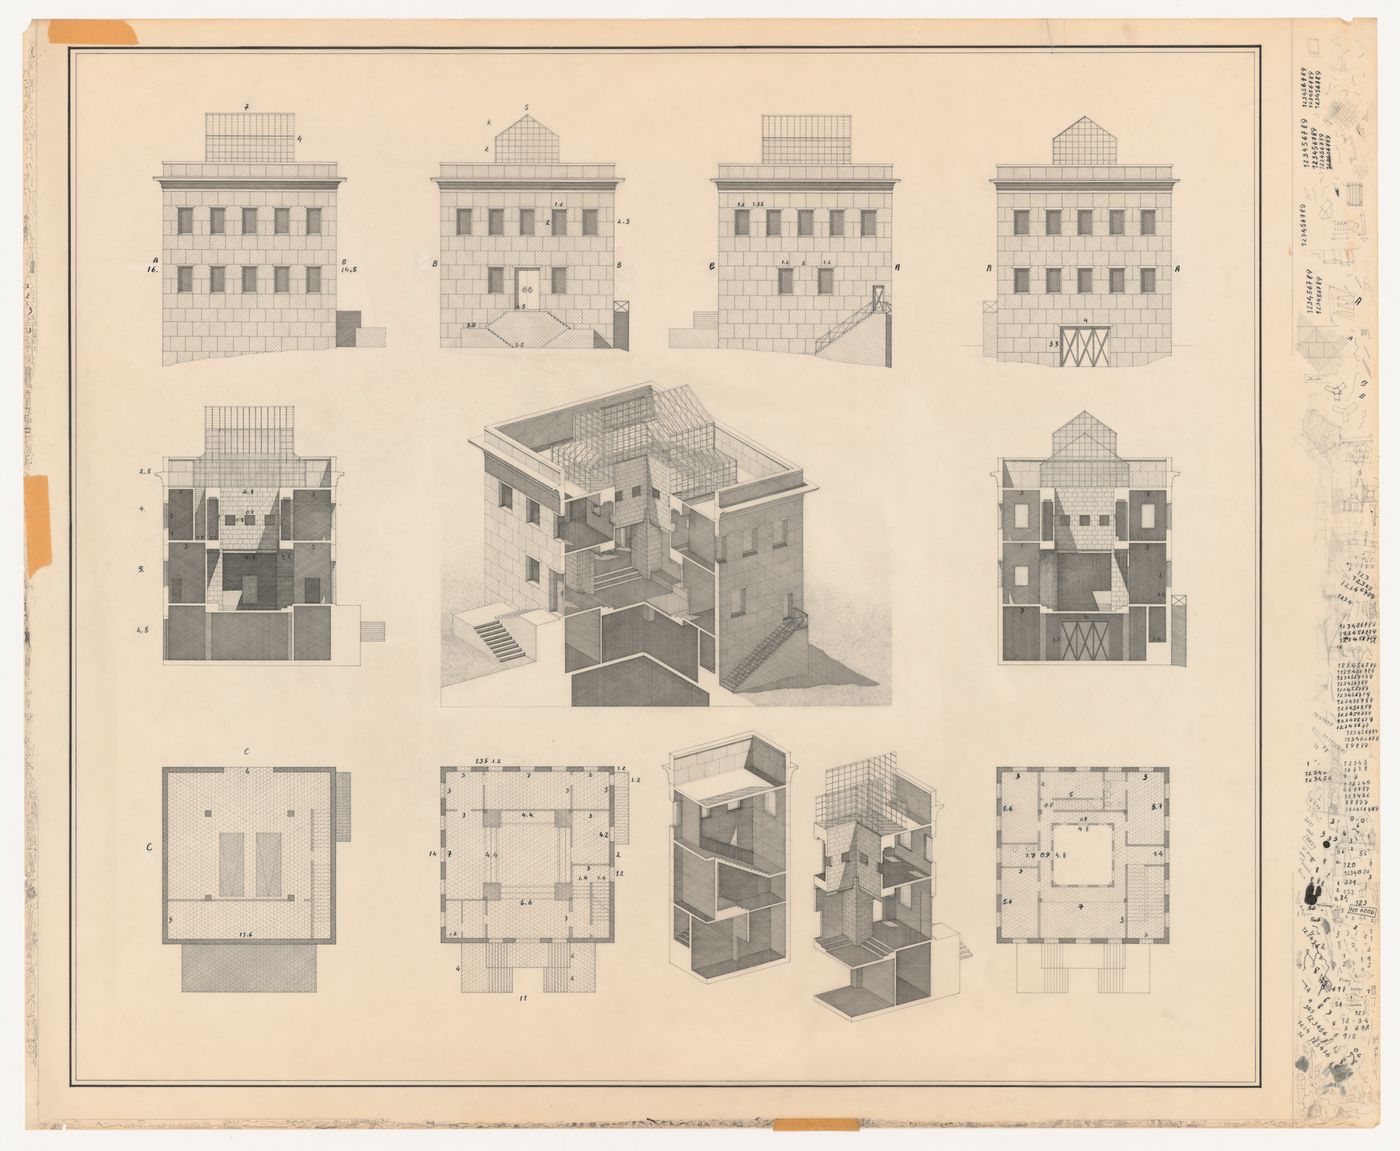 Elevations, sections, sectional axonometrics, and plans with sketches for Casa Vattani, Rome, Italy